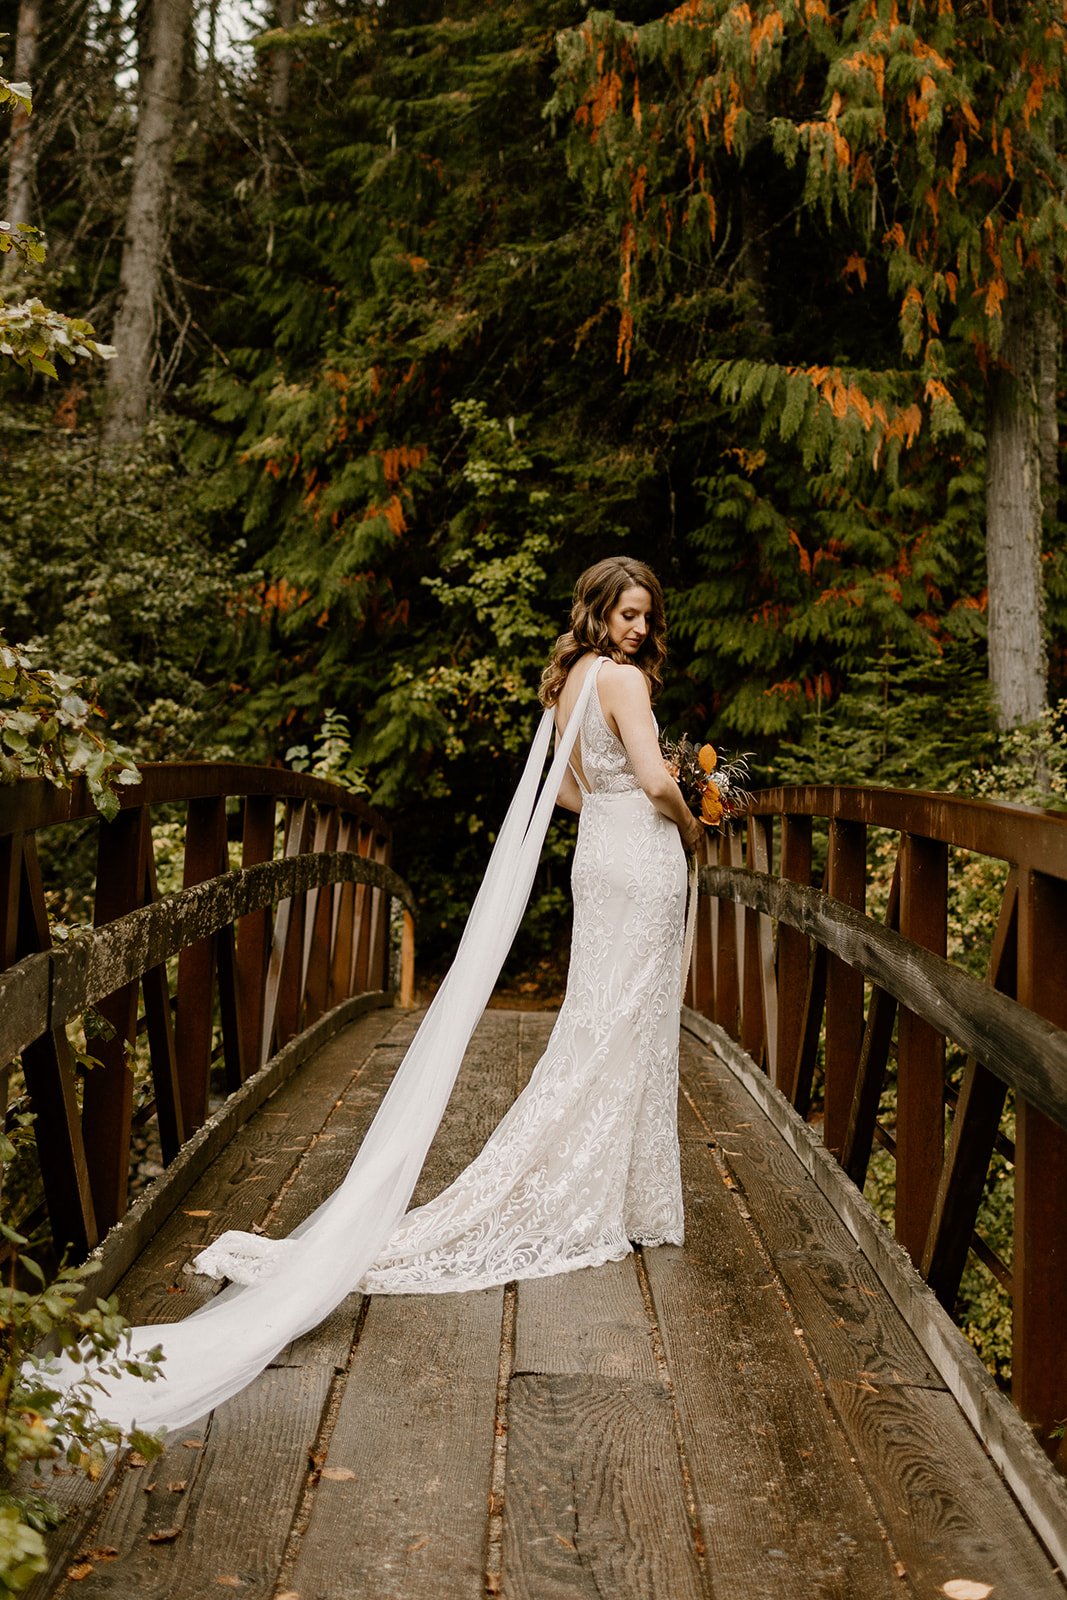 aandbe real bride in riley luxe wedding dress by made with love